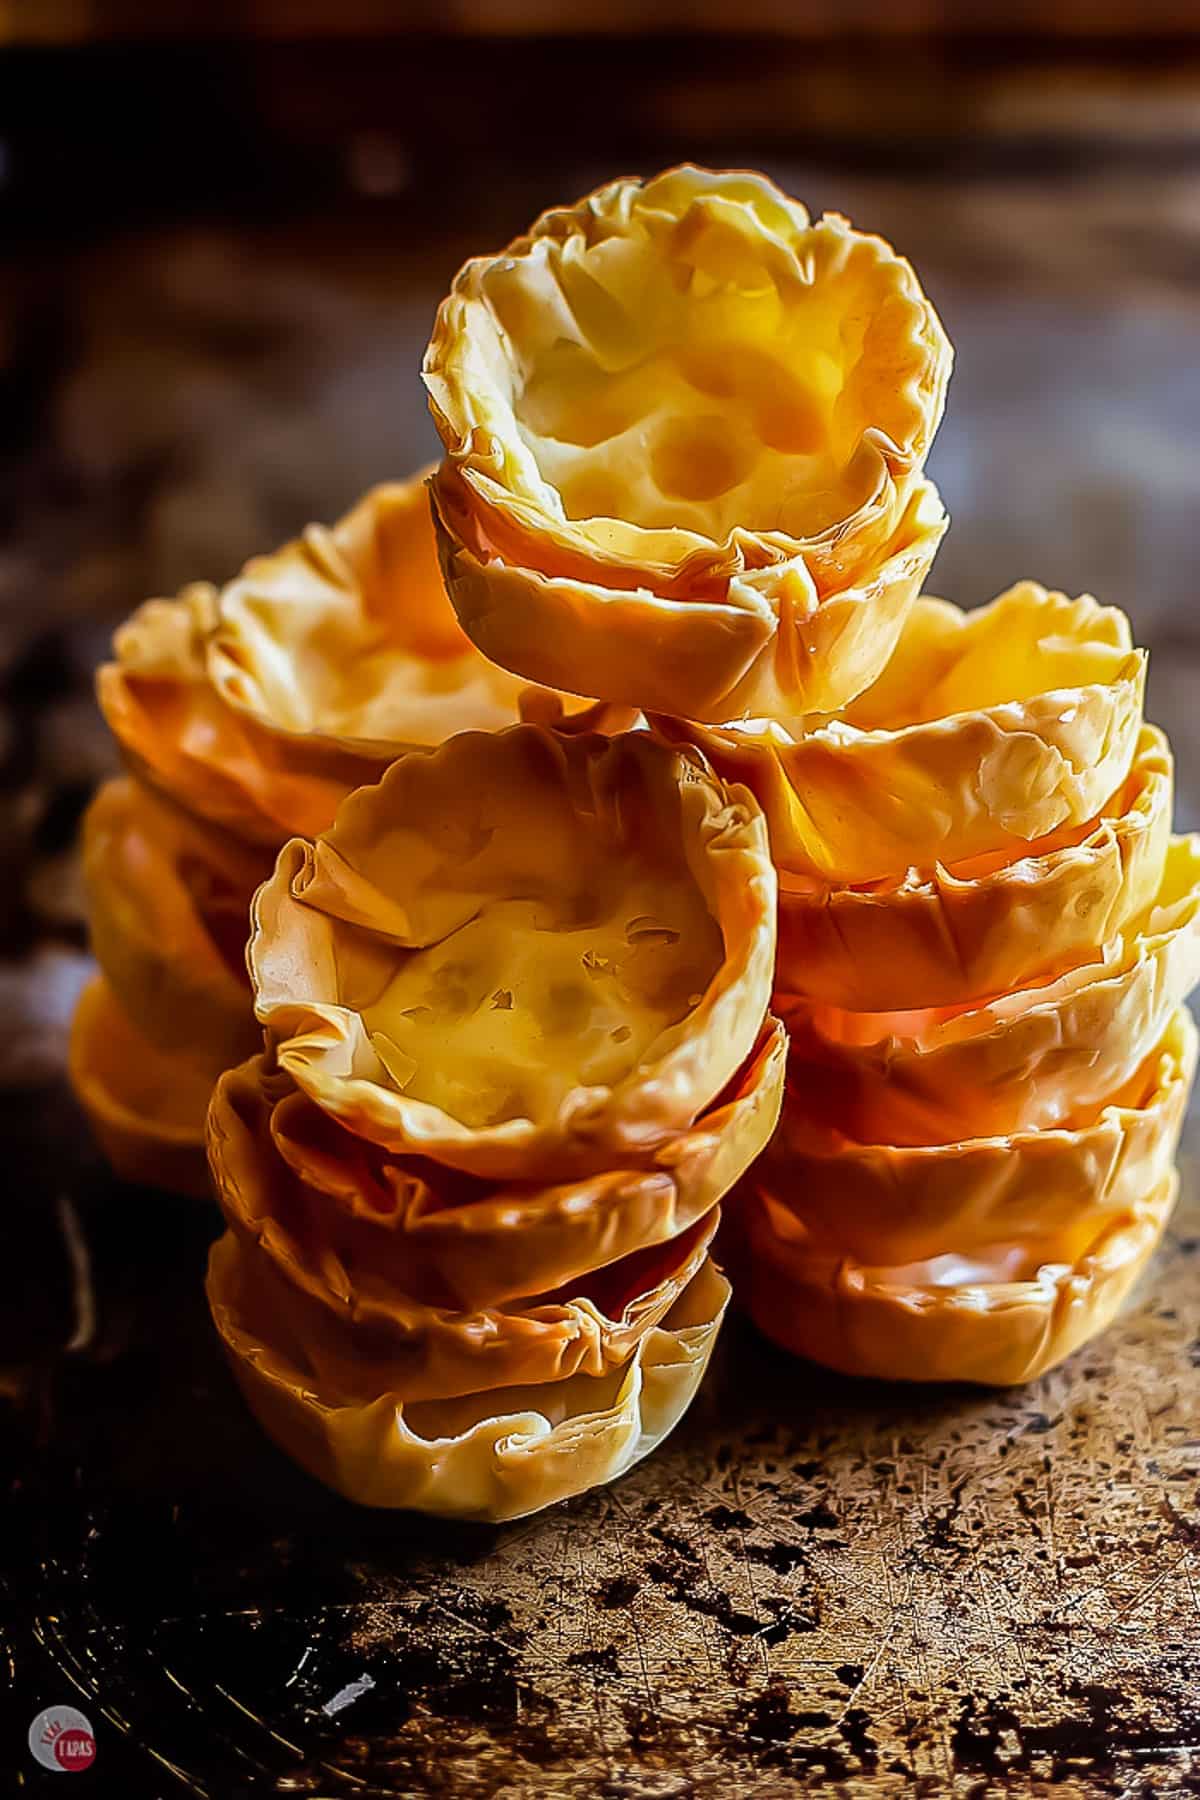 stacks of empty phyllo cups on a baking sheet